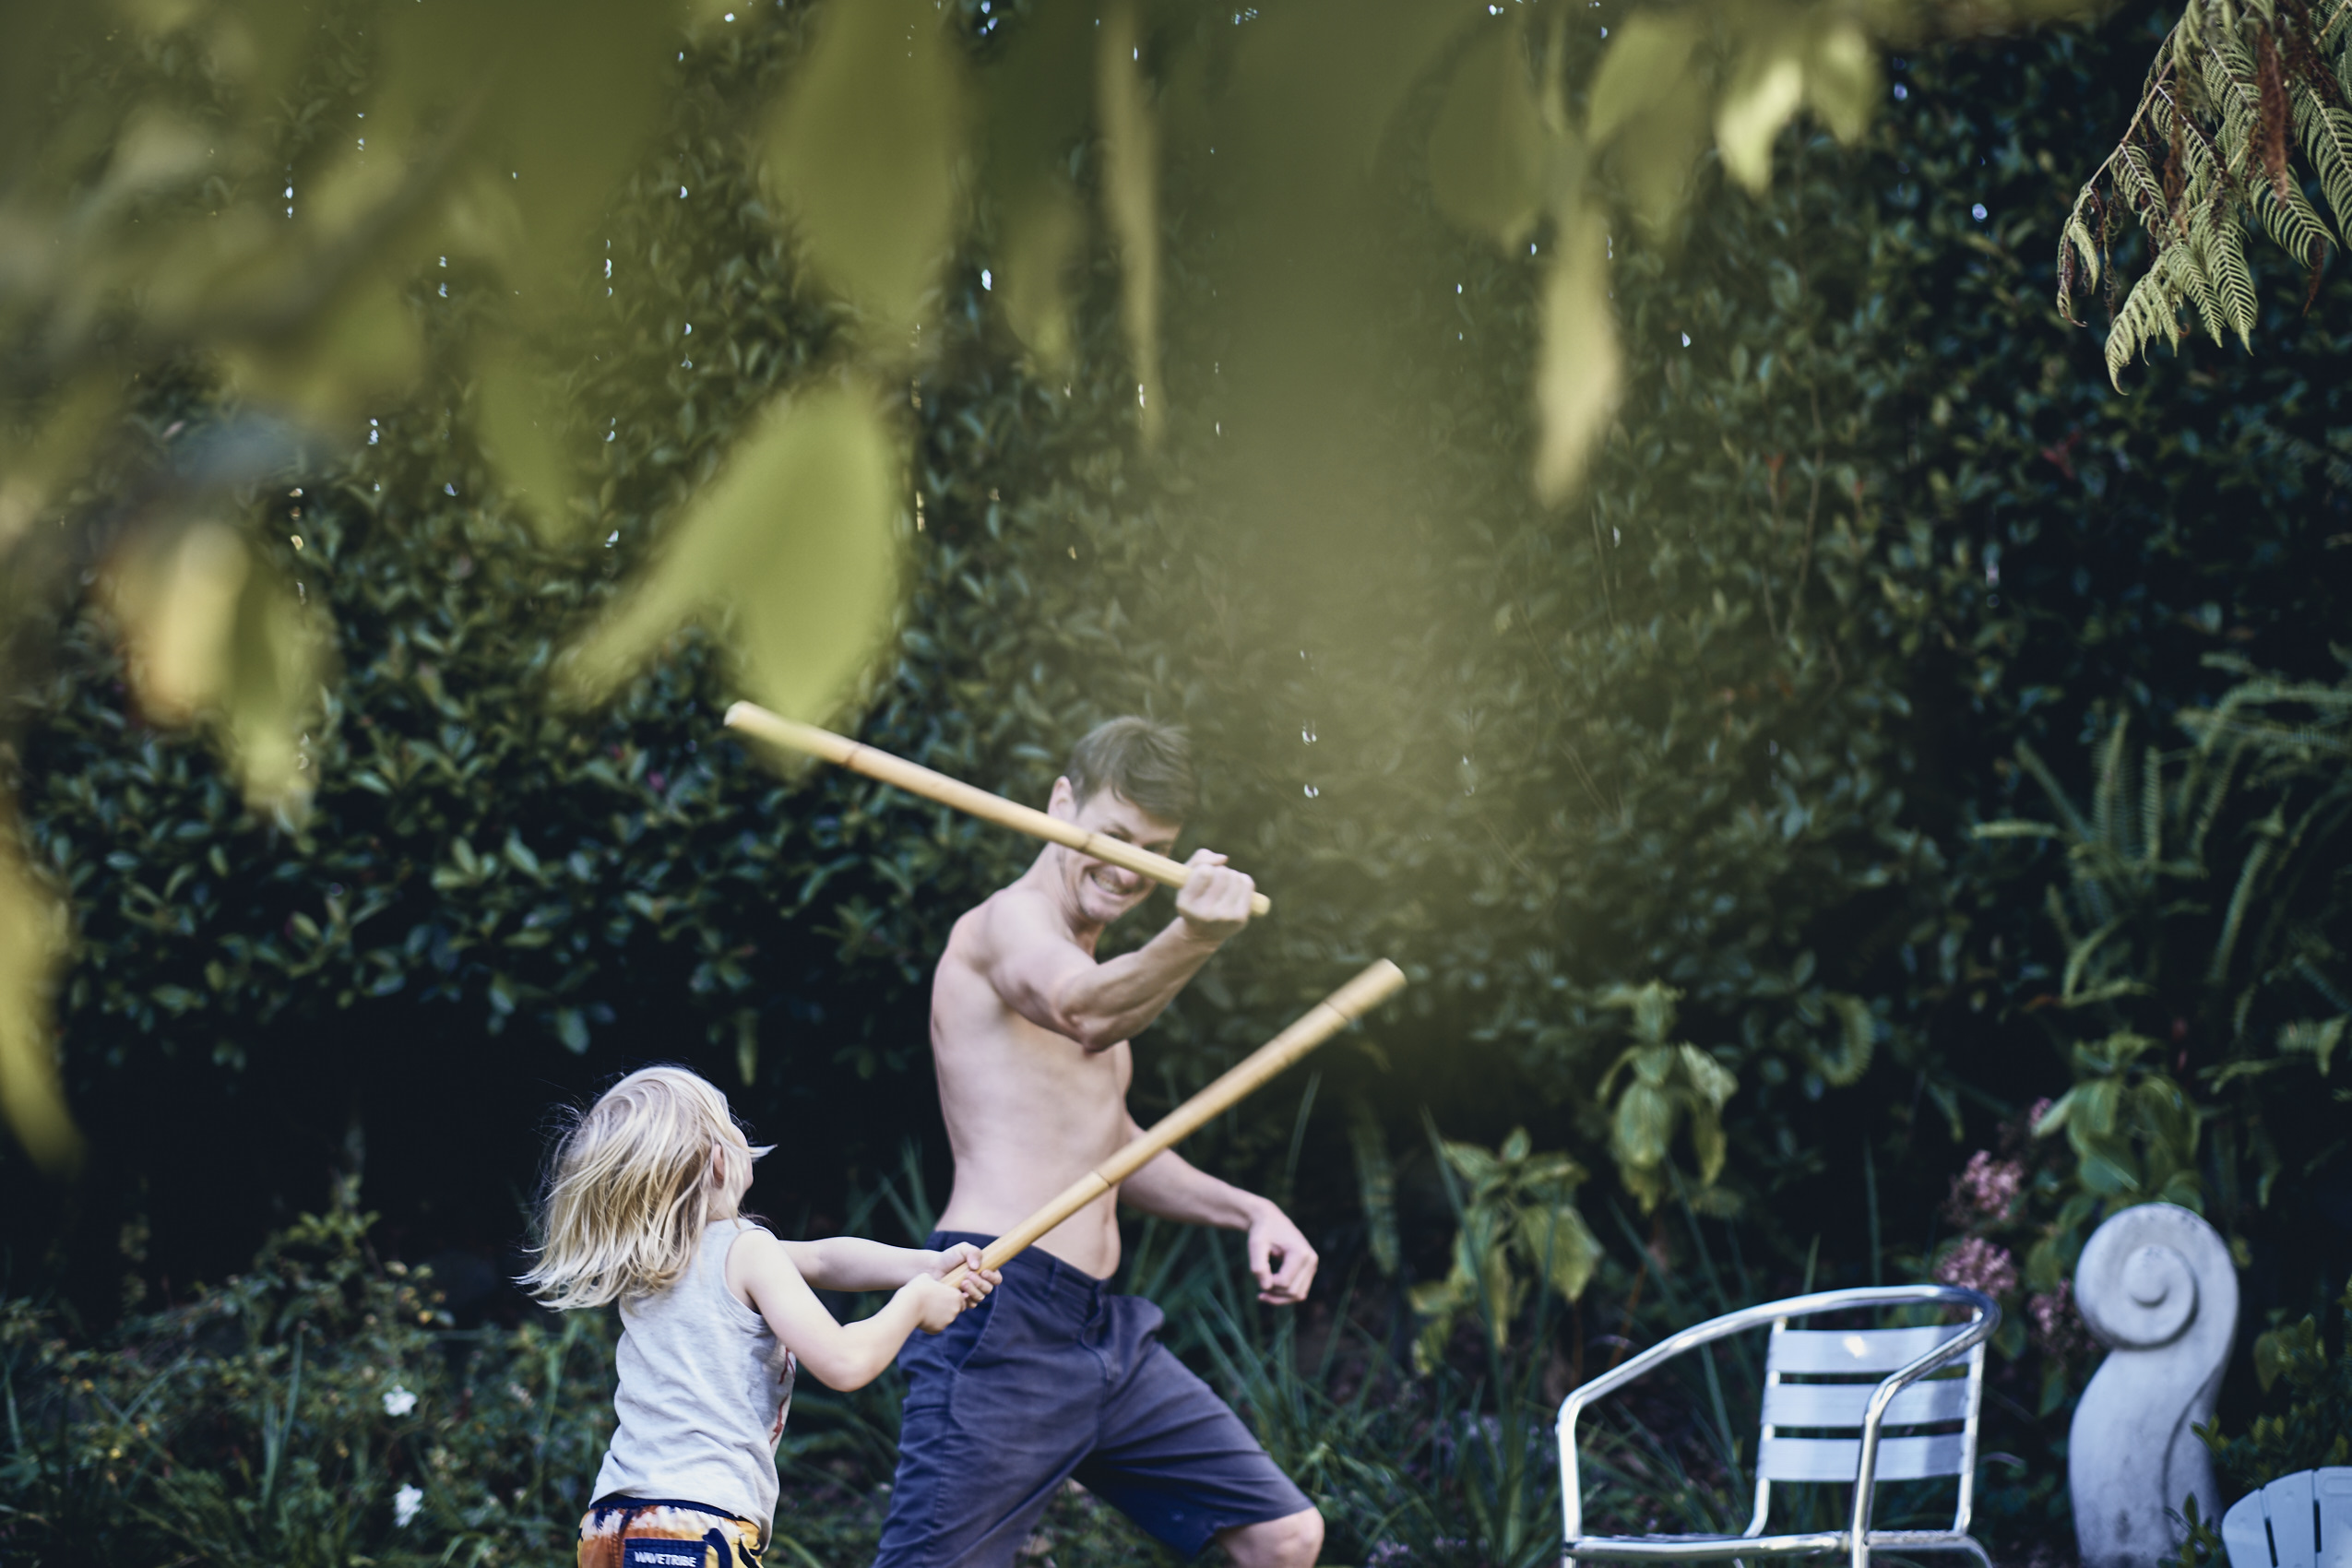 Lockdown • Father & Son Sword fighting with Sticks in Garden • Lifestyle & Portrait Photography